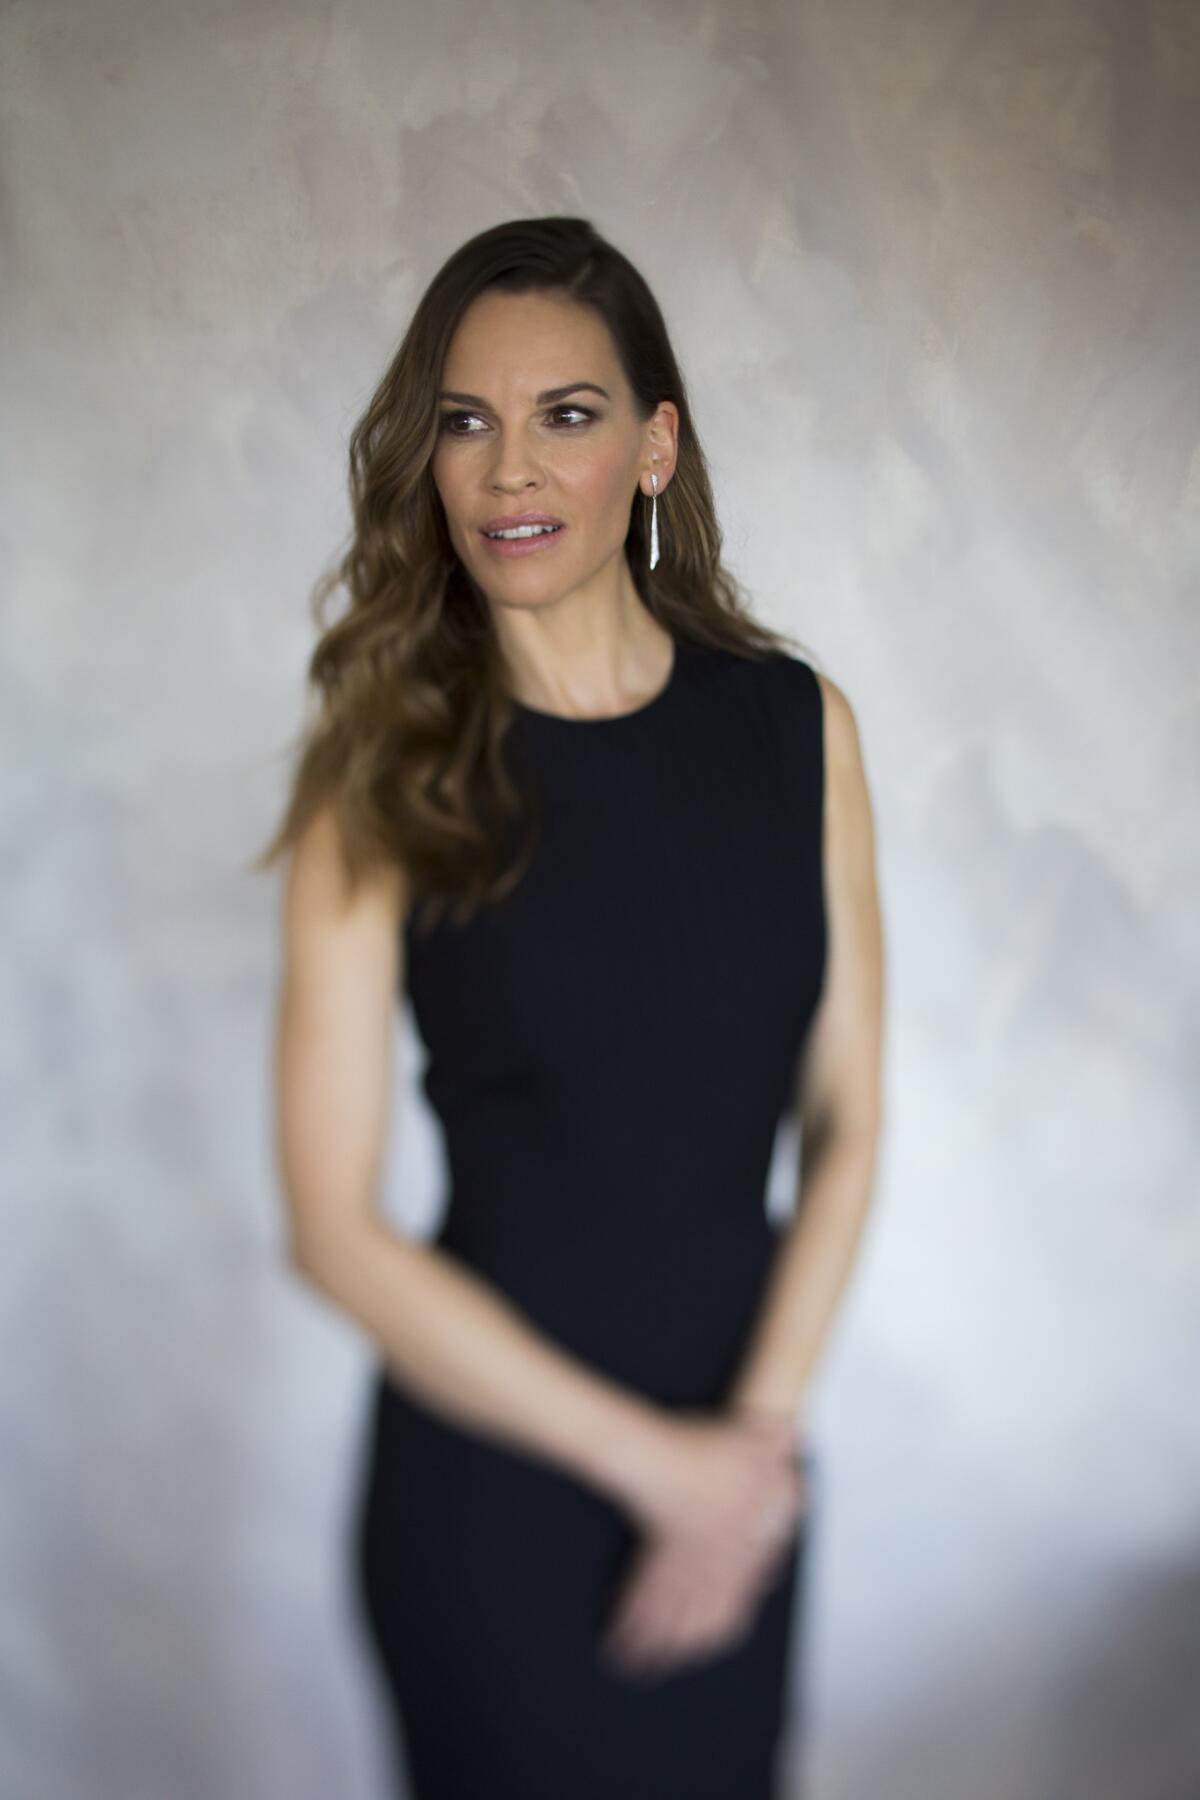 Two-time Academy Award-winning actress Hilary Swank, photographed here at the W Hotel in Los Angeles, makes her TV return on the new FX series, "Trust."